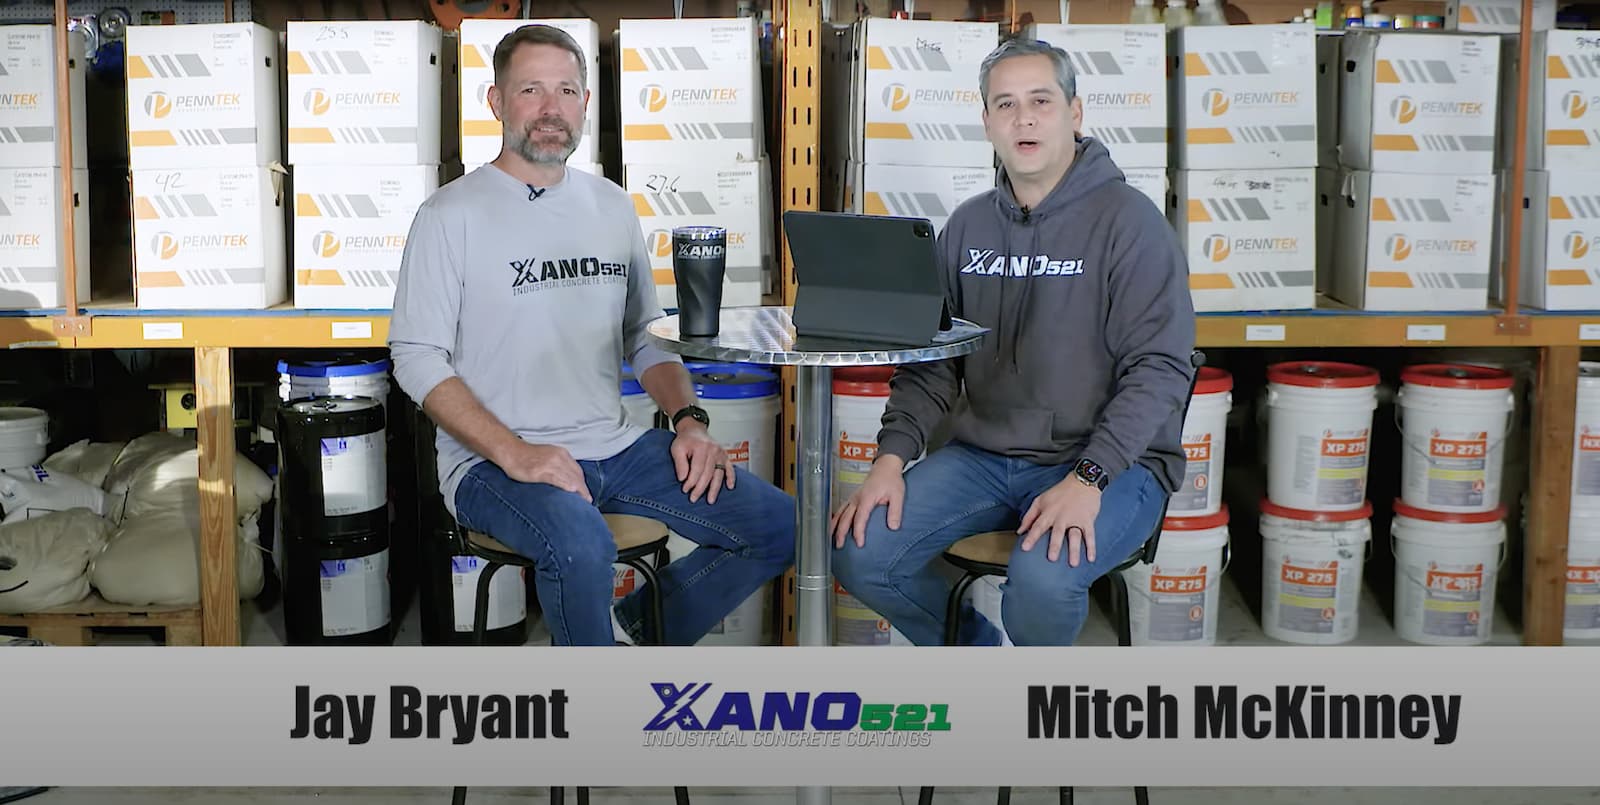 duo Understanding Concrete Preparation and Repair with Xano 521